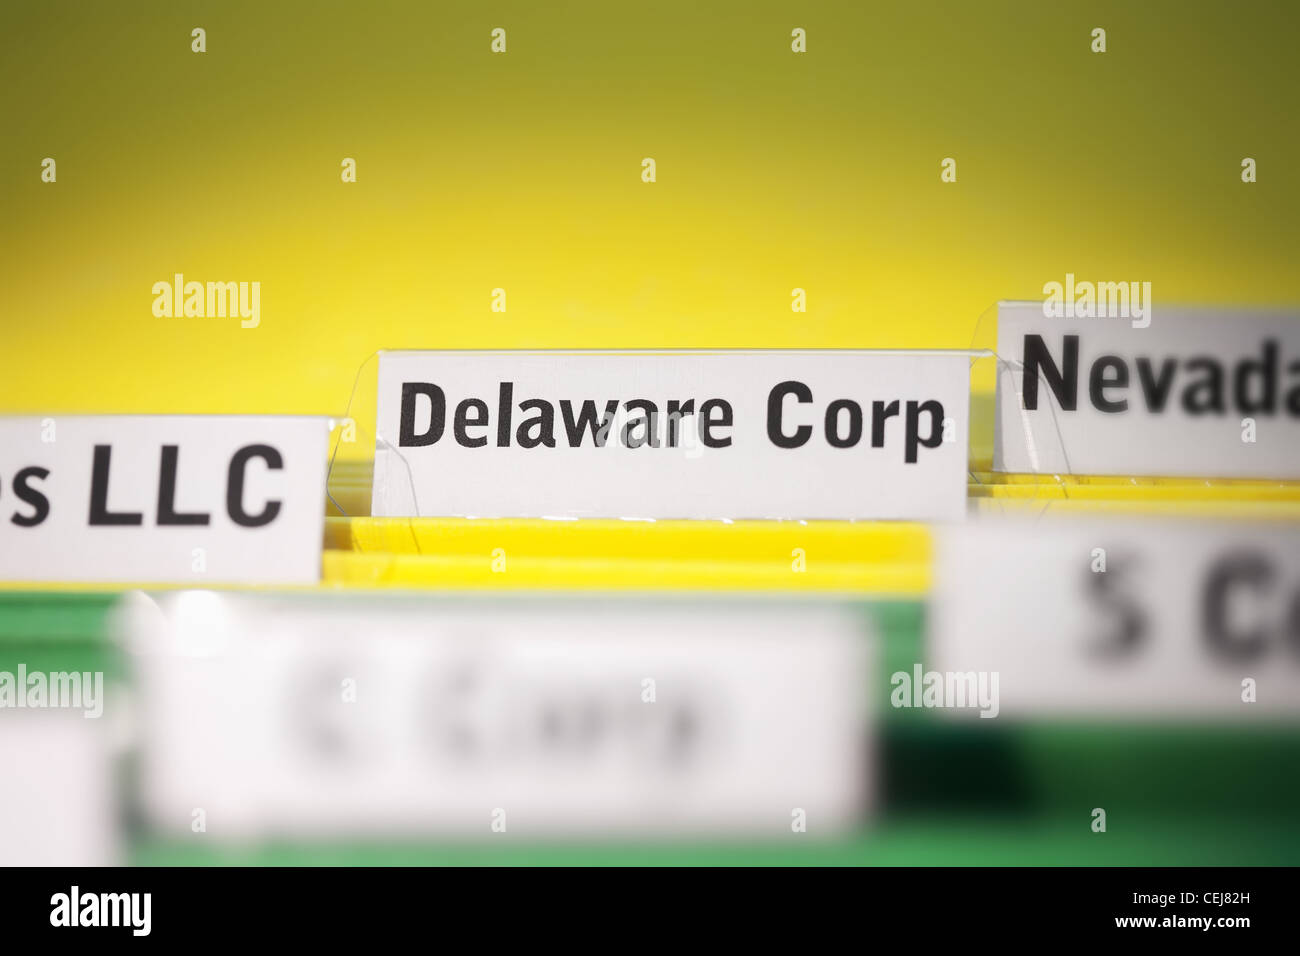 Delaware corporation folder in focus among other businesses Stock Photo